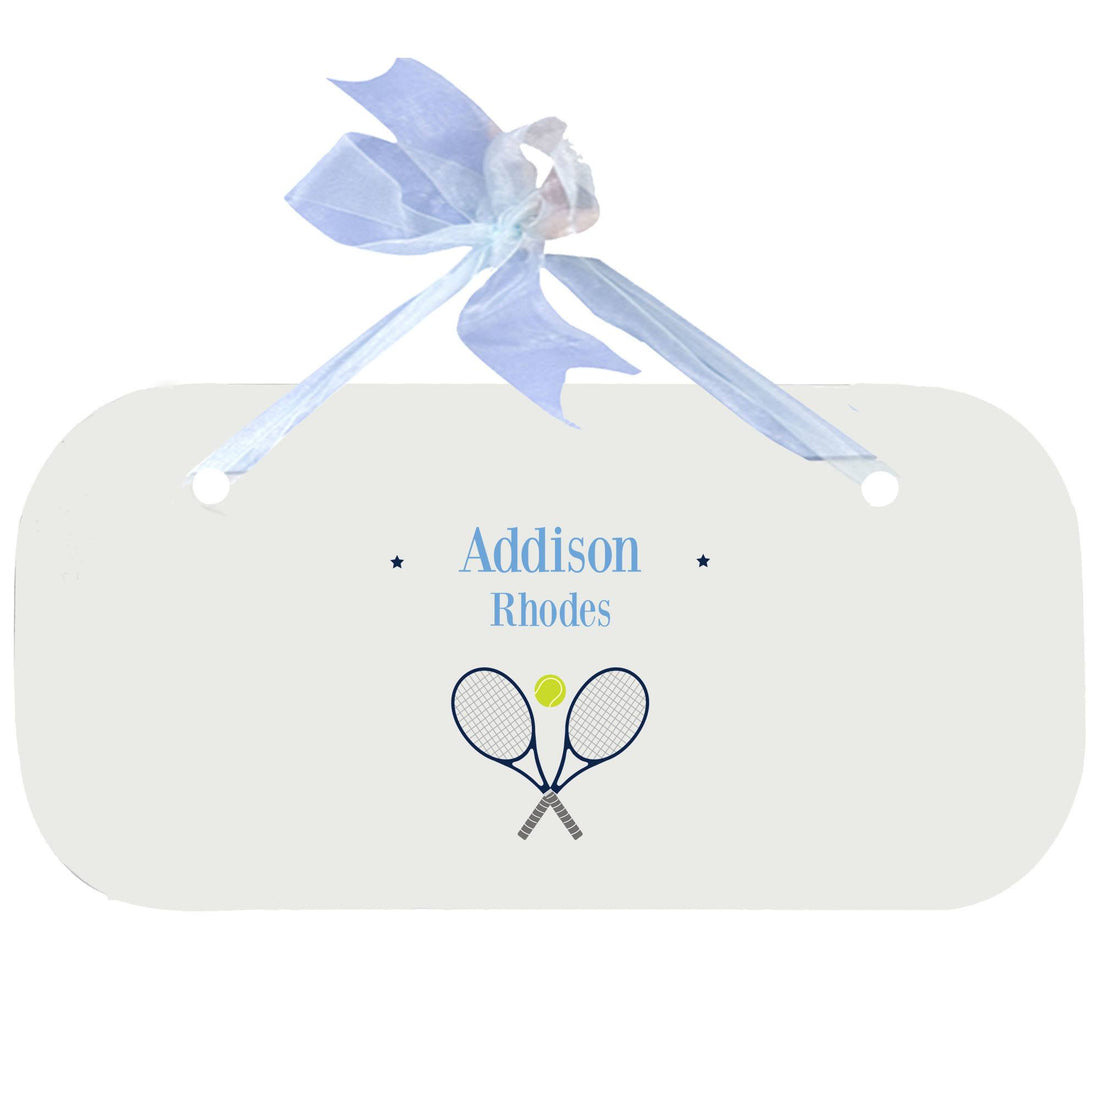 Personalized Plaque with Tennis design